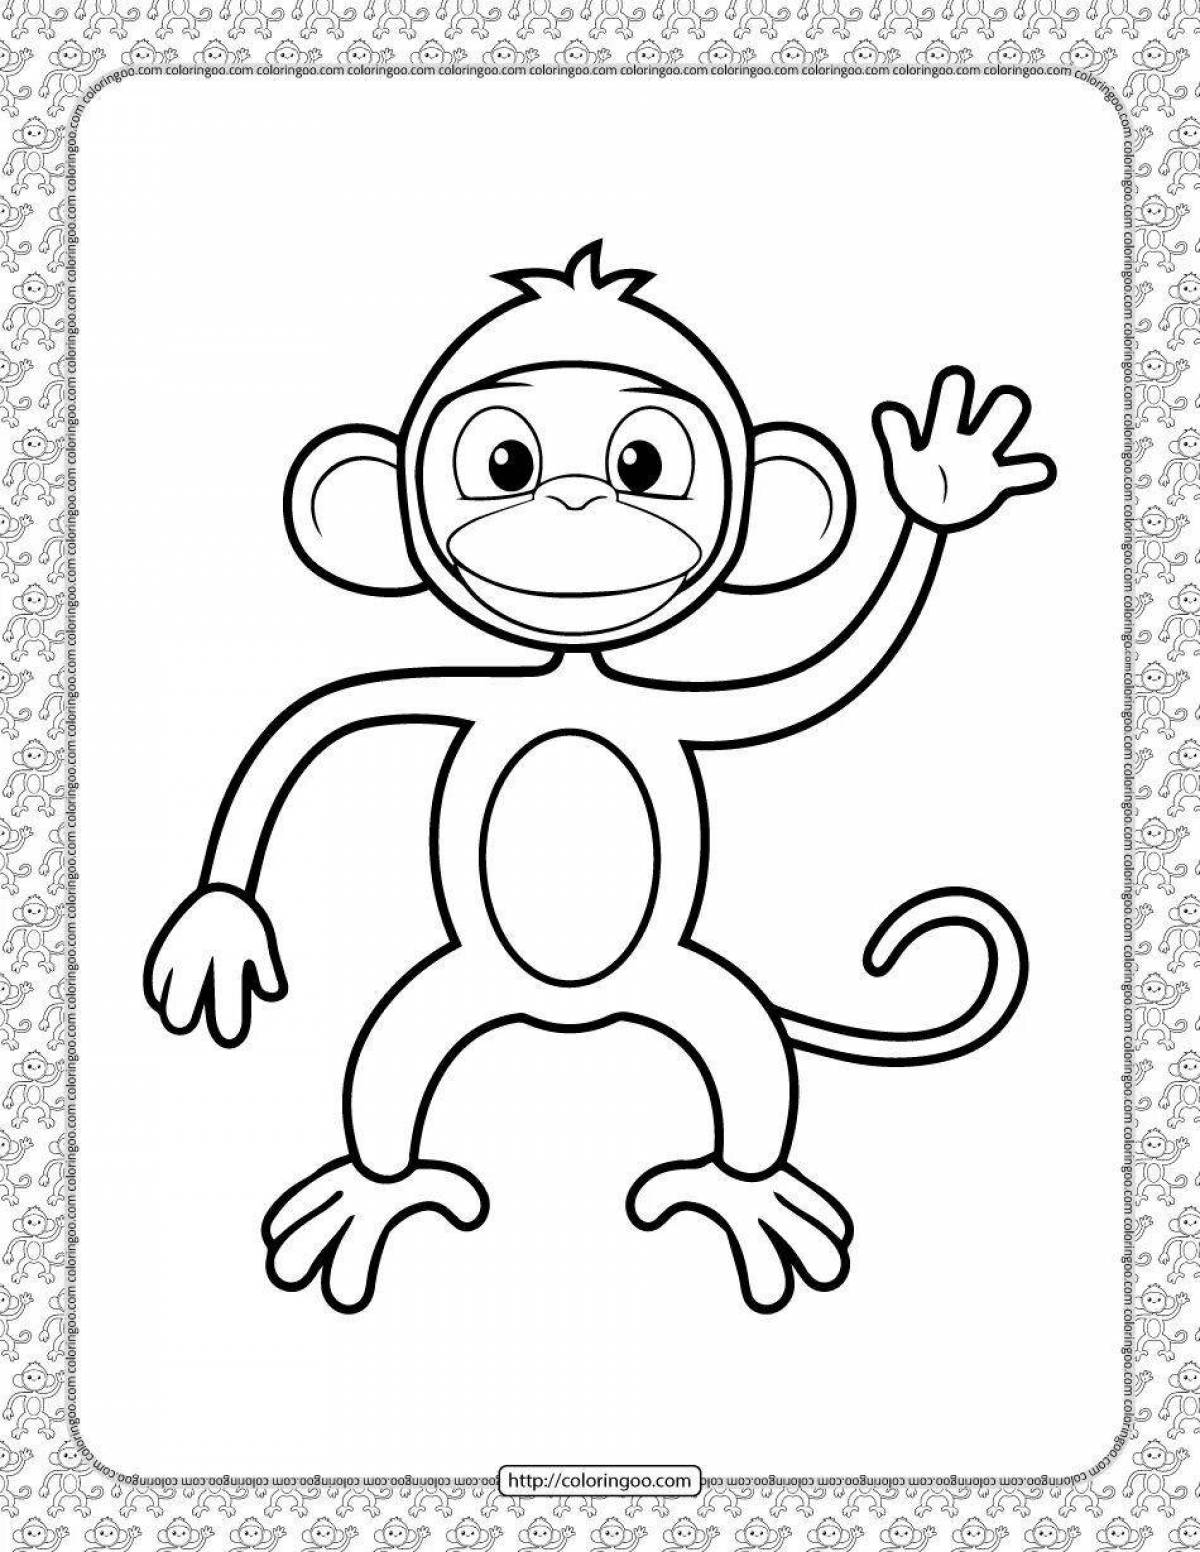 Coloring page for lure kids